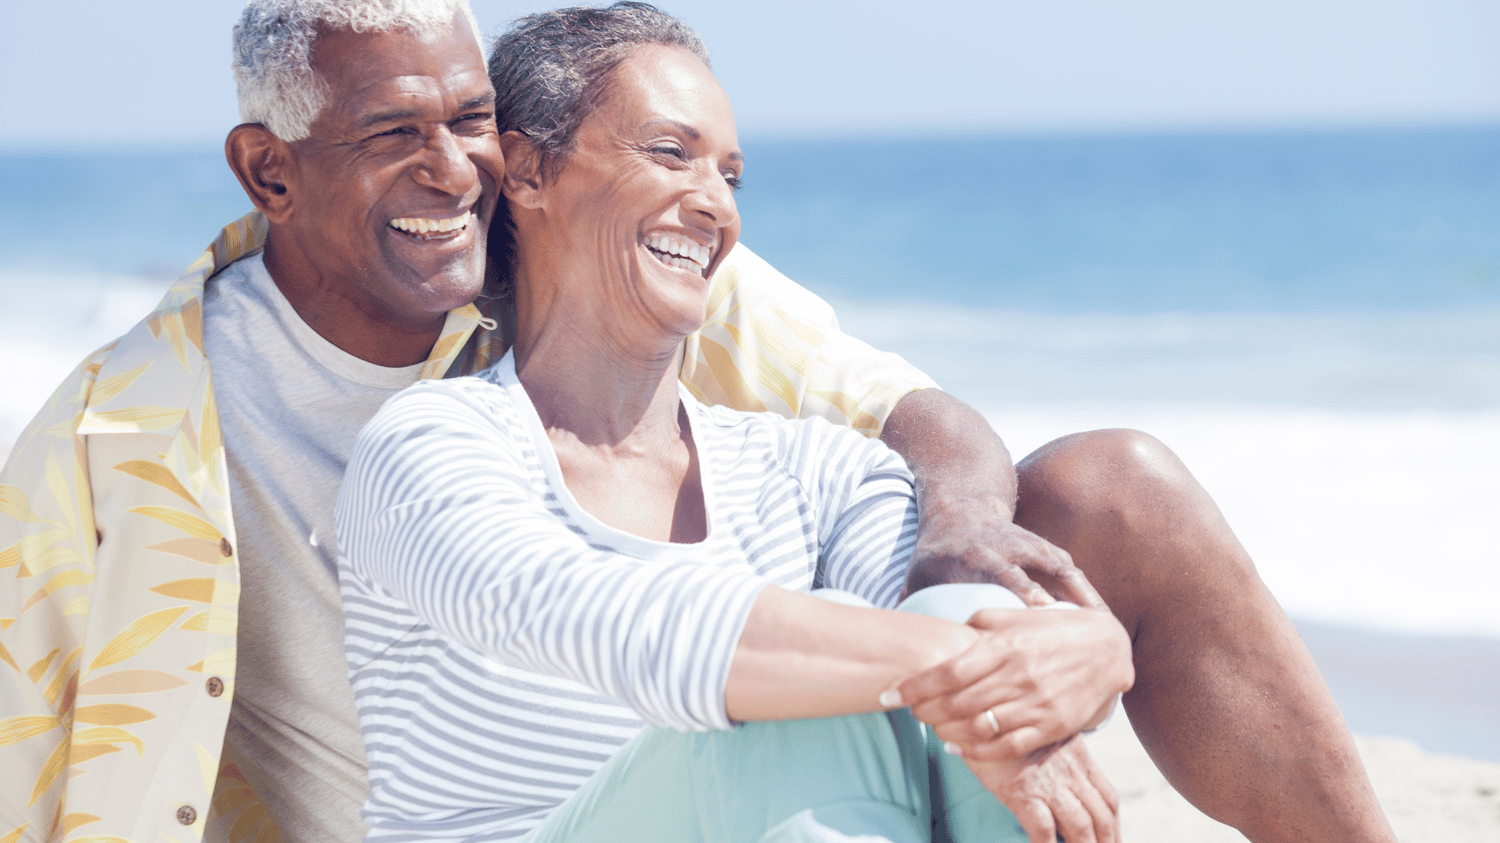 SECURING YOUR FUTURE WITH MULTI-YEAR GUARANTEED ANNUITIES